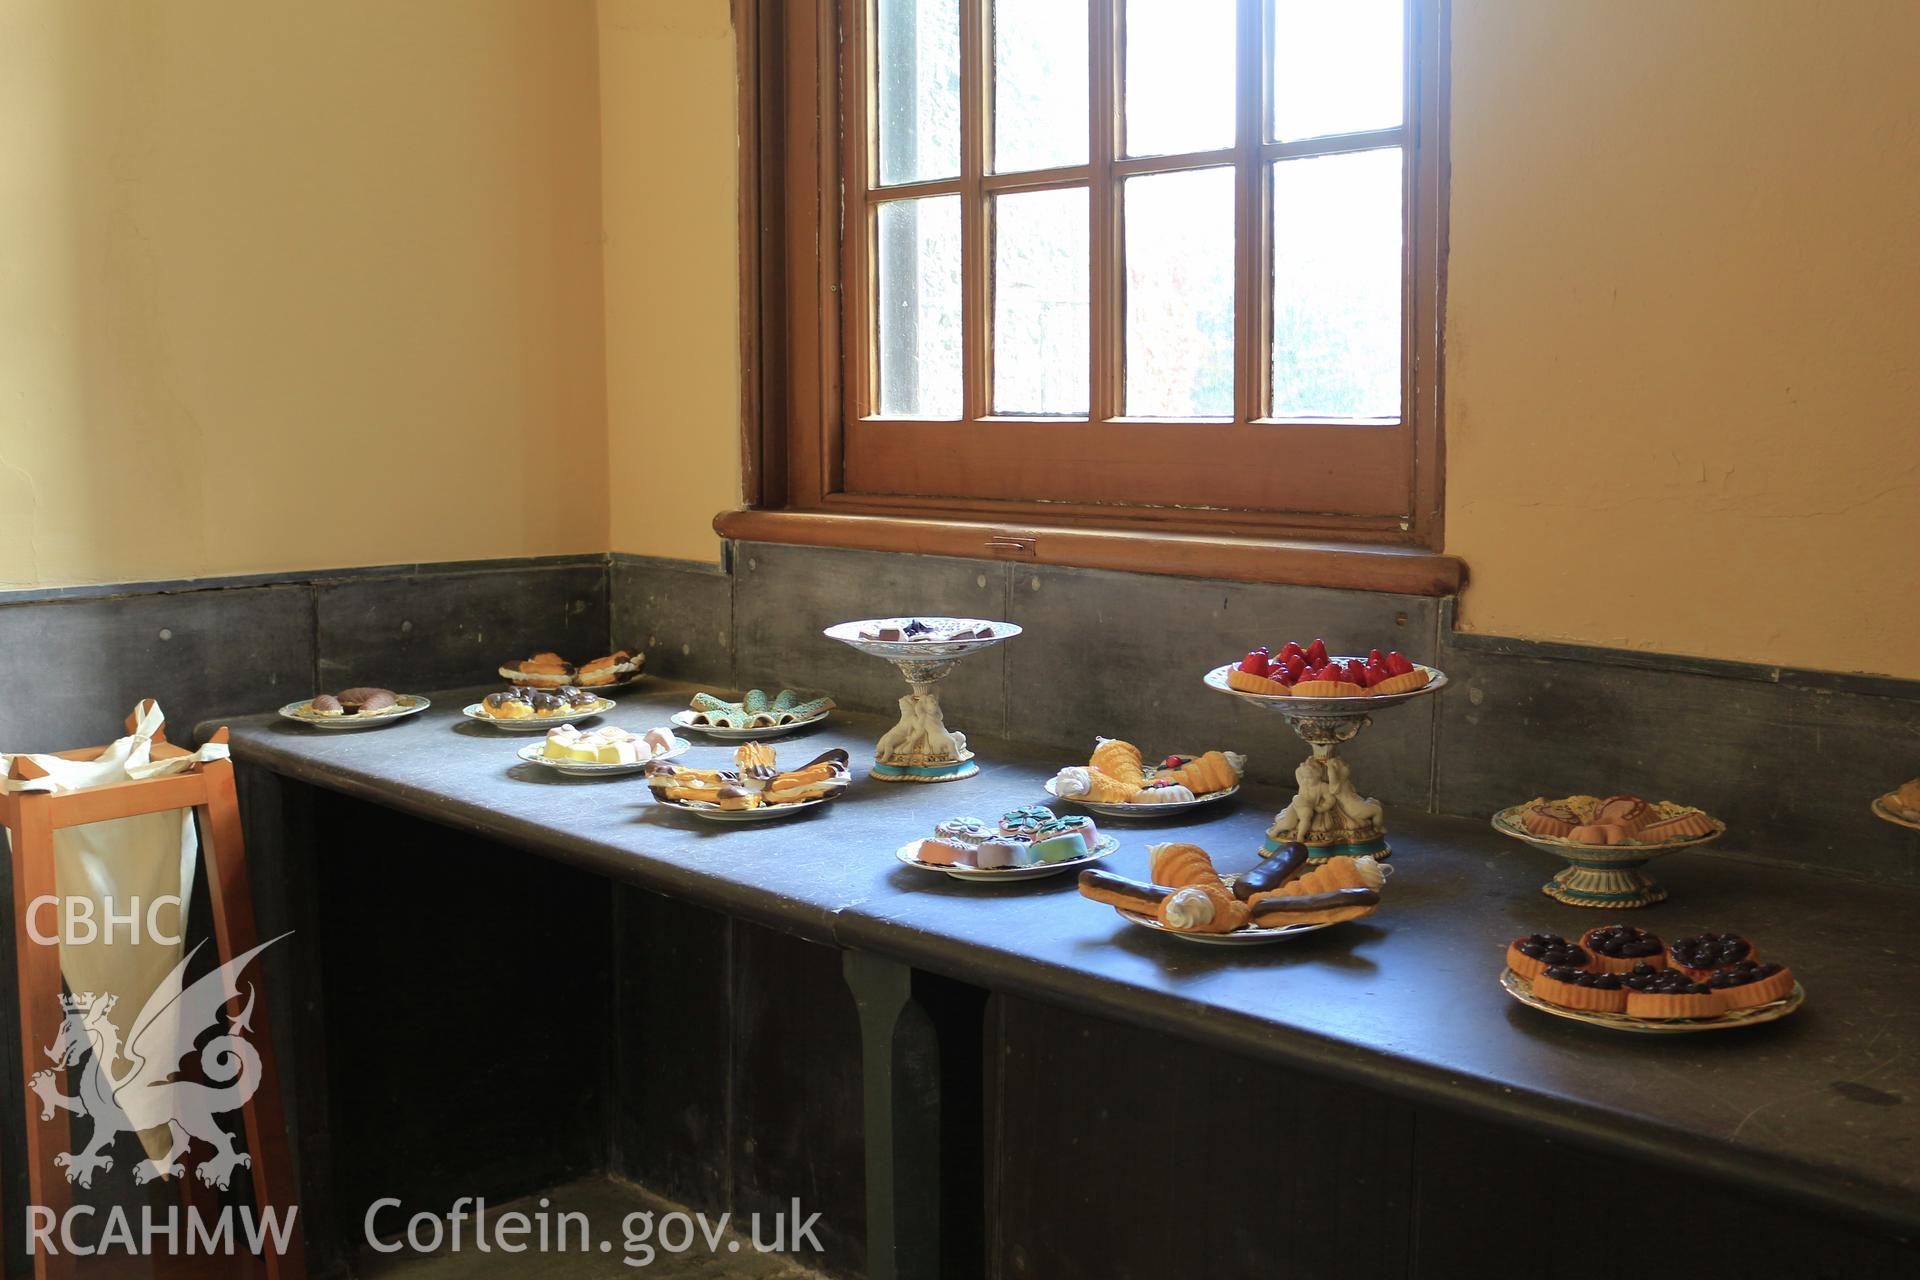 Photographic survey of Penrhyn Castle, Bangor Kitchens, display of desserts (wax models)